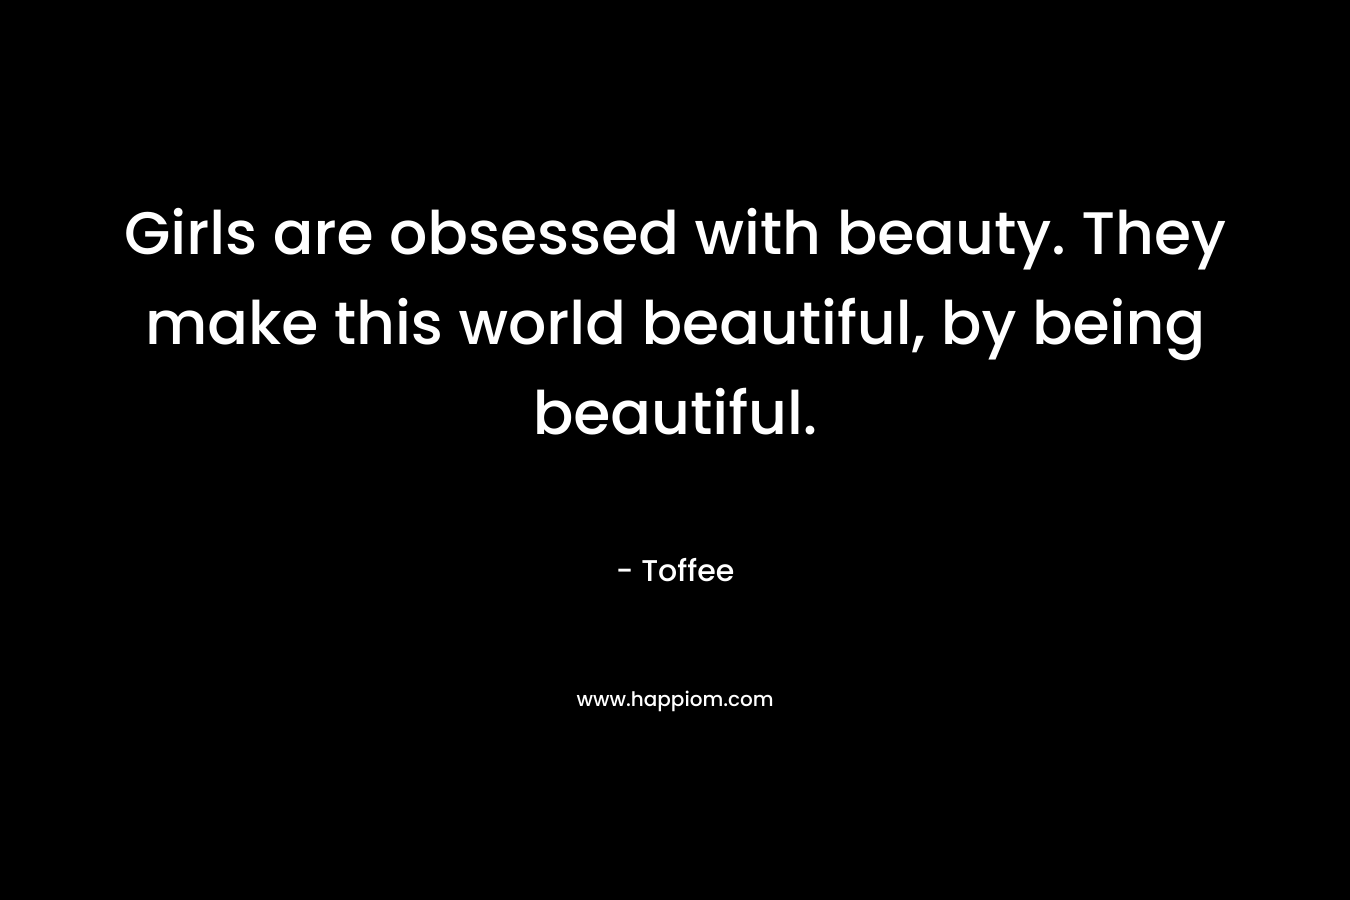 Girls are obsessed with beauty. They make this world beautiful, by being beautiful.